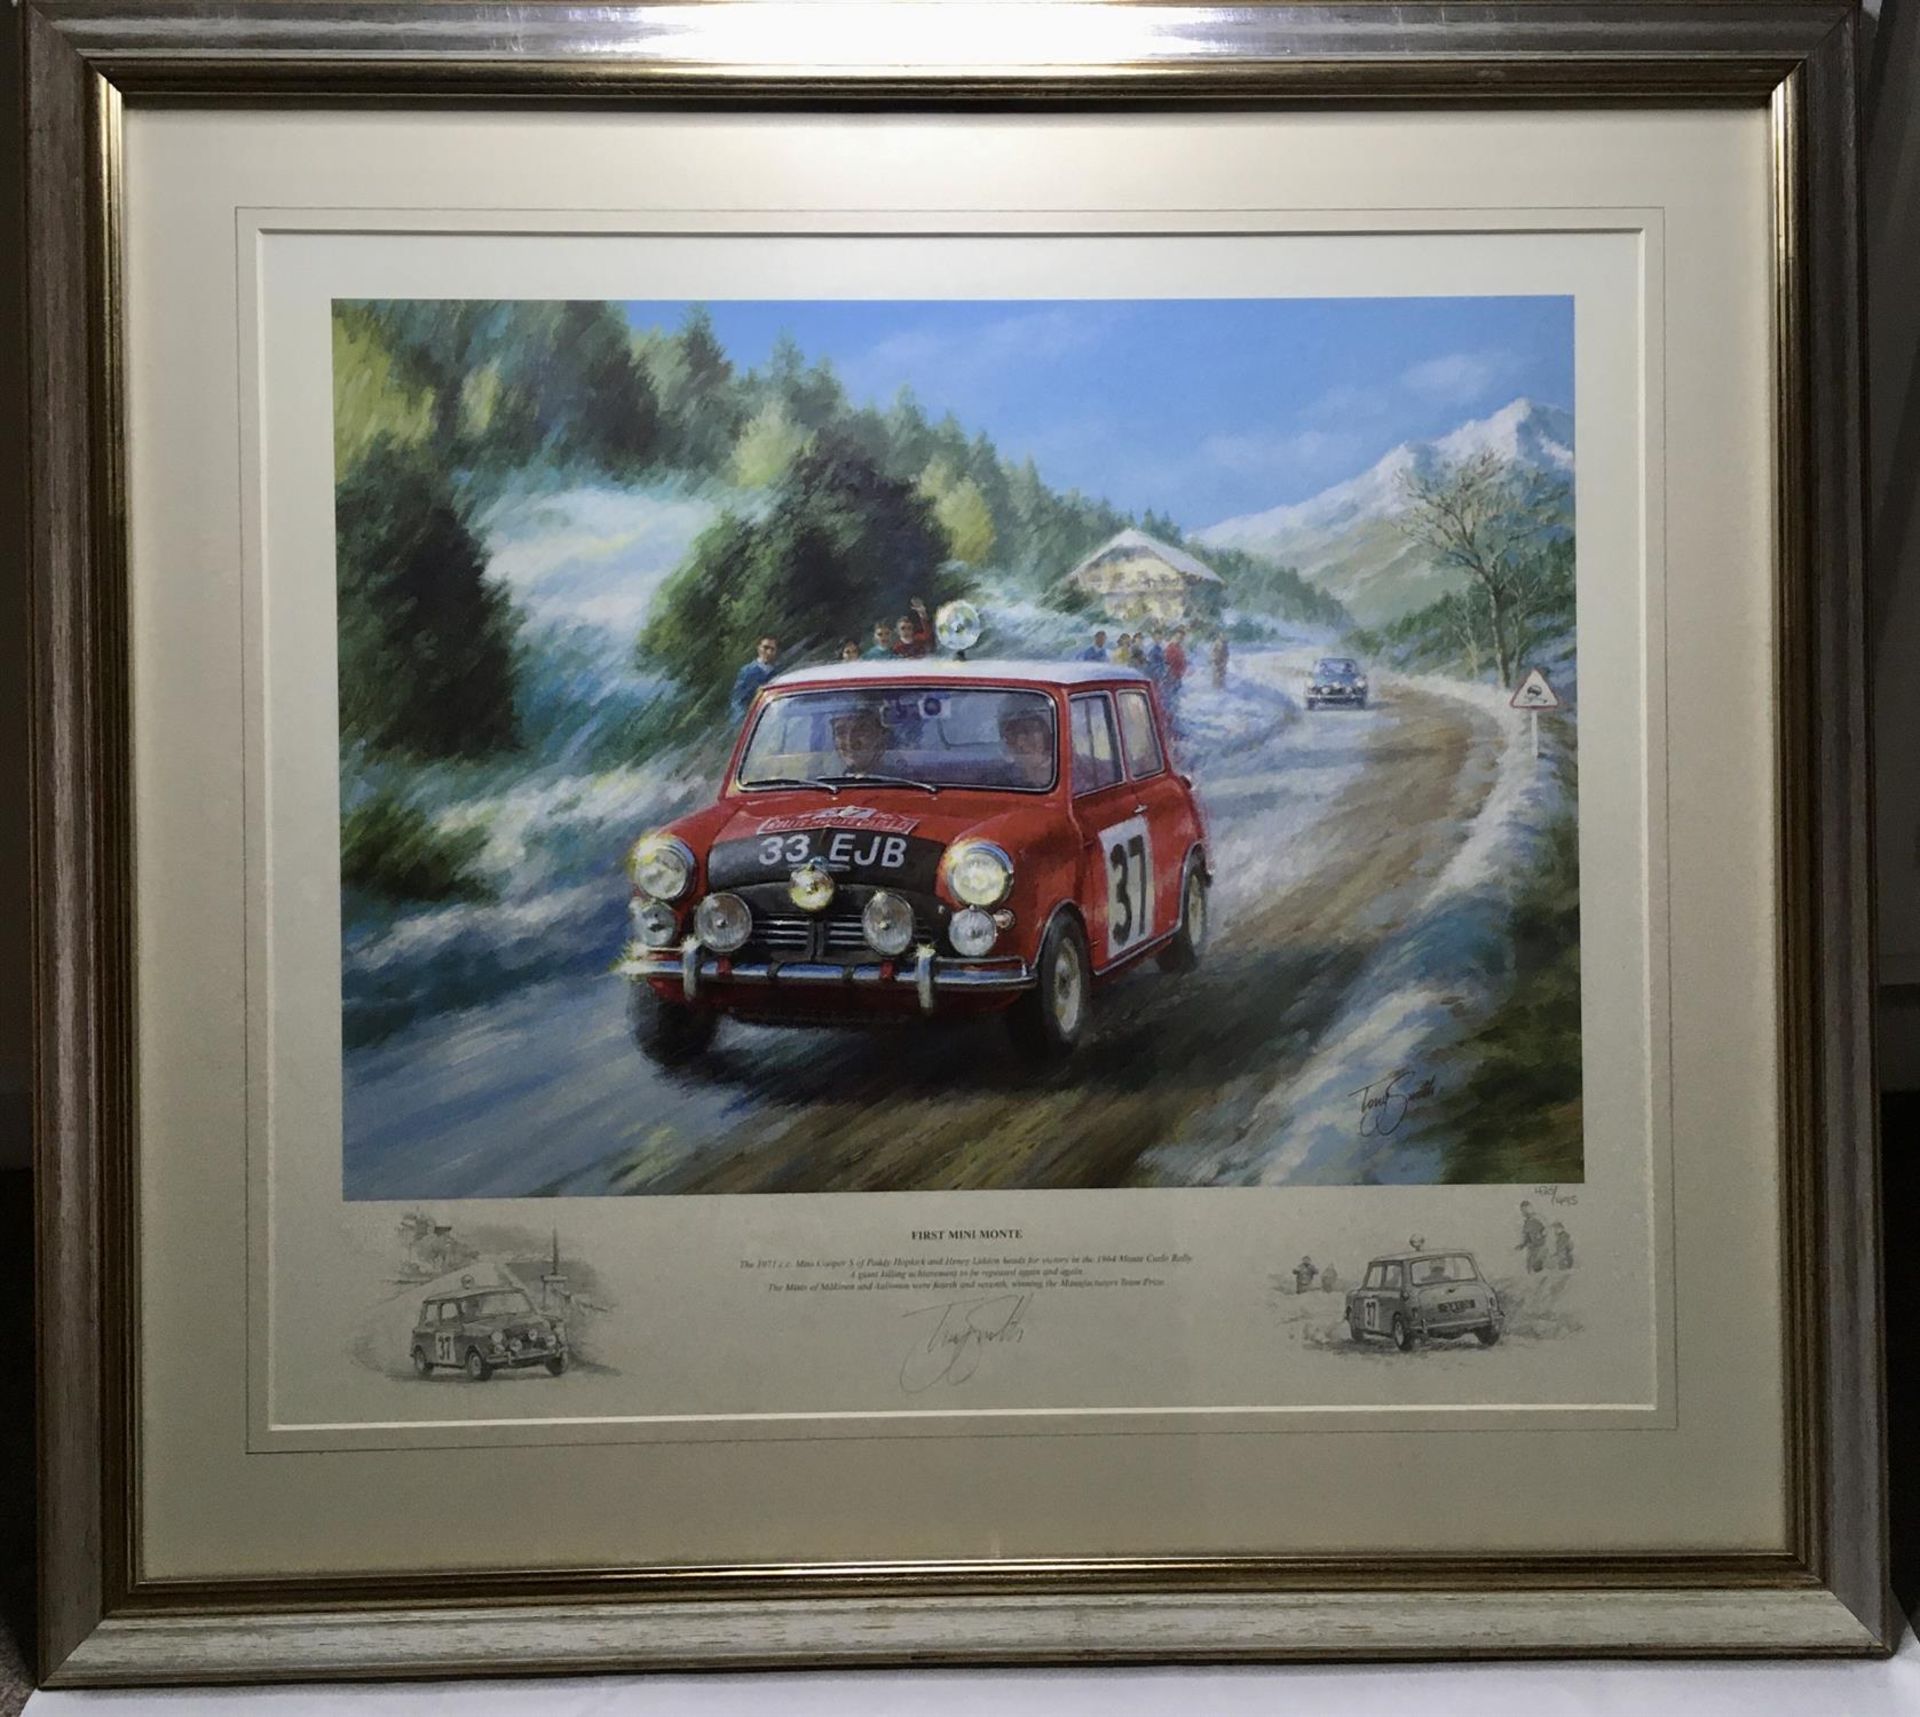 A Full Set of Tony Smith's The Monte Carlo Mini Limited Edition Prints with Matching Numbers - Image 2 of 6